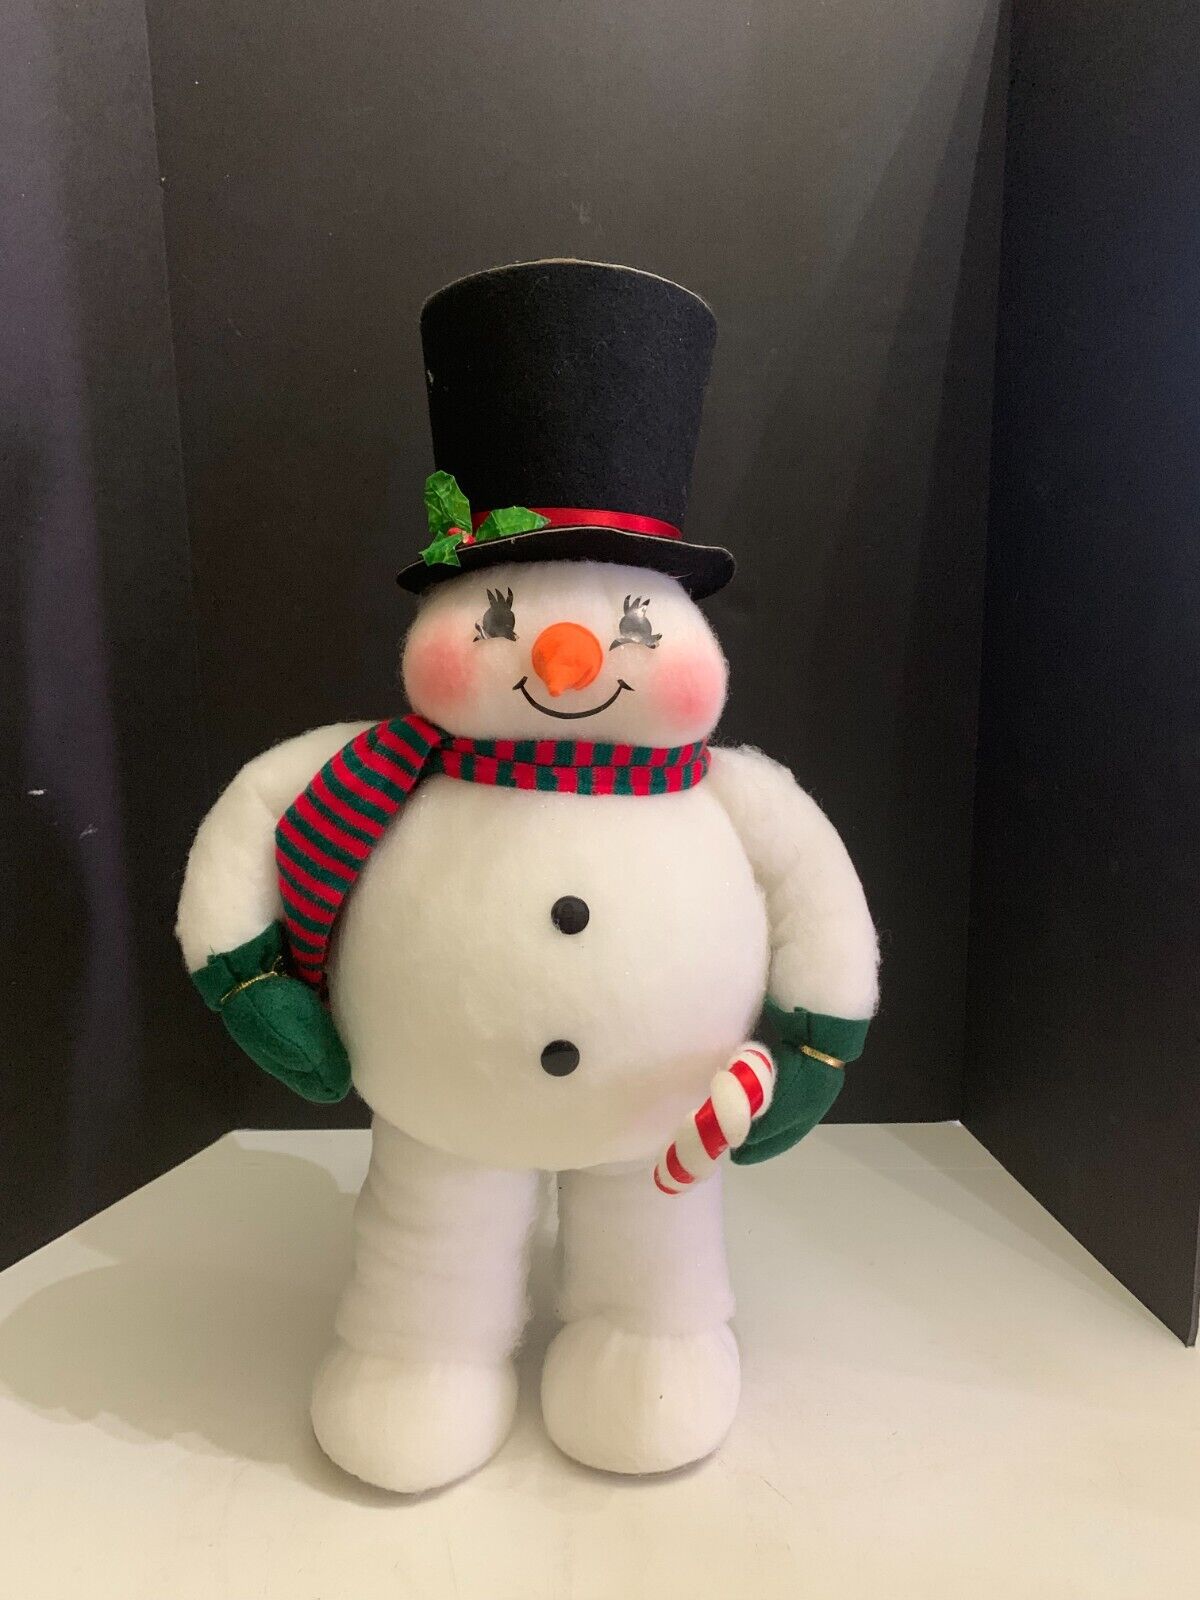 Vintage Large Fluffy Snowman Christmas Decoration 23 inches Tall Made in Taiwan